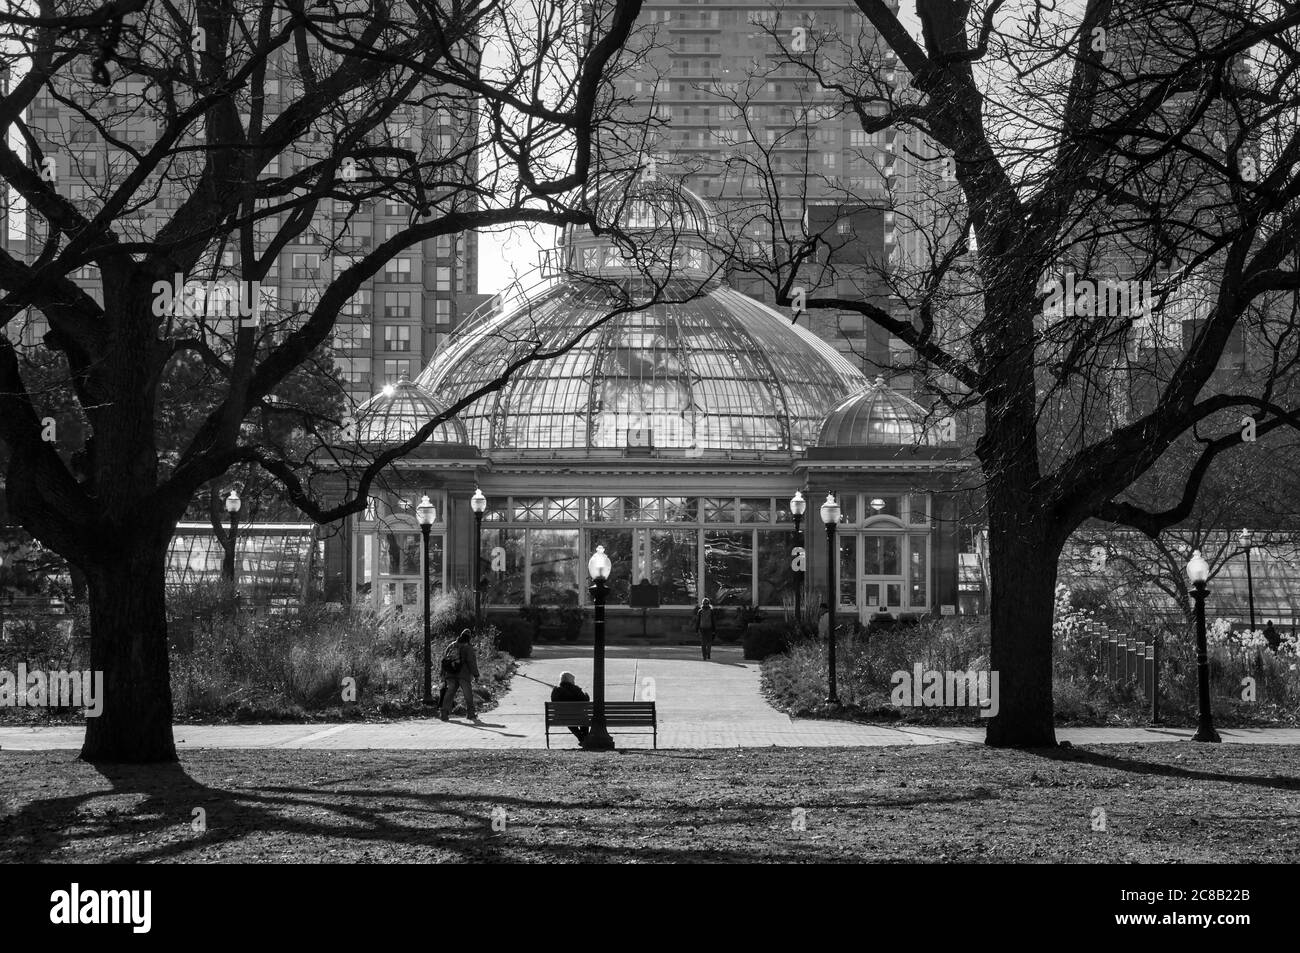 Early spring sunset in Toronto Allan Gardens Park with a greenhouse in front of high rise buildings. Monochrome Stock Photo